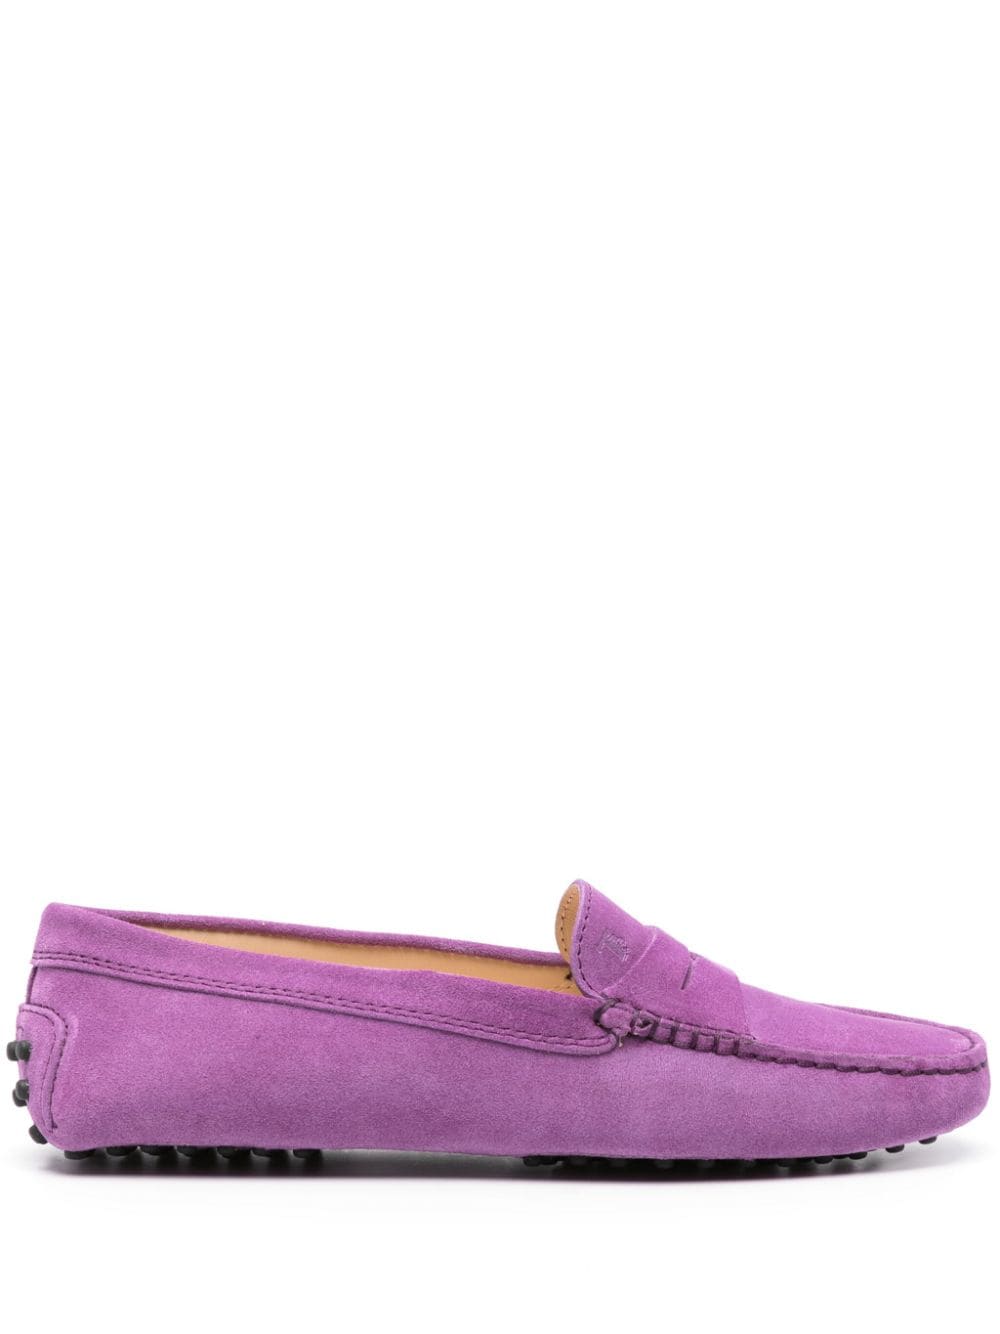 Tod's suede penny loafers - Purple von Tod's